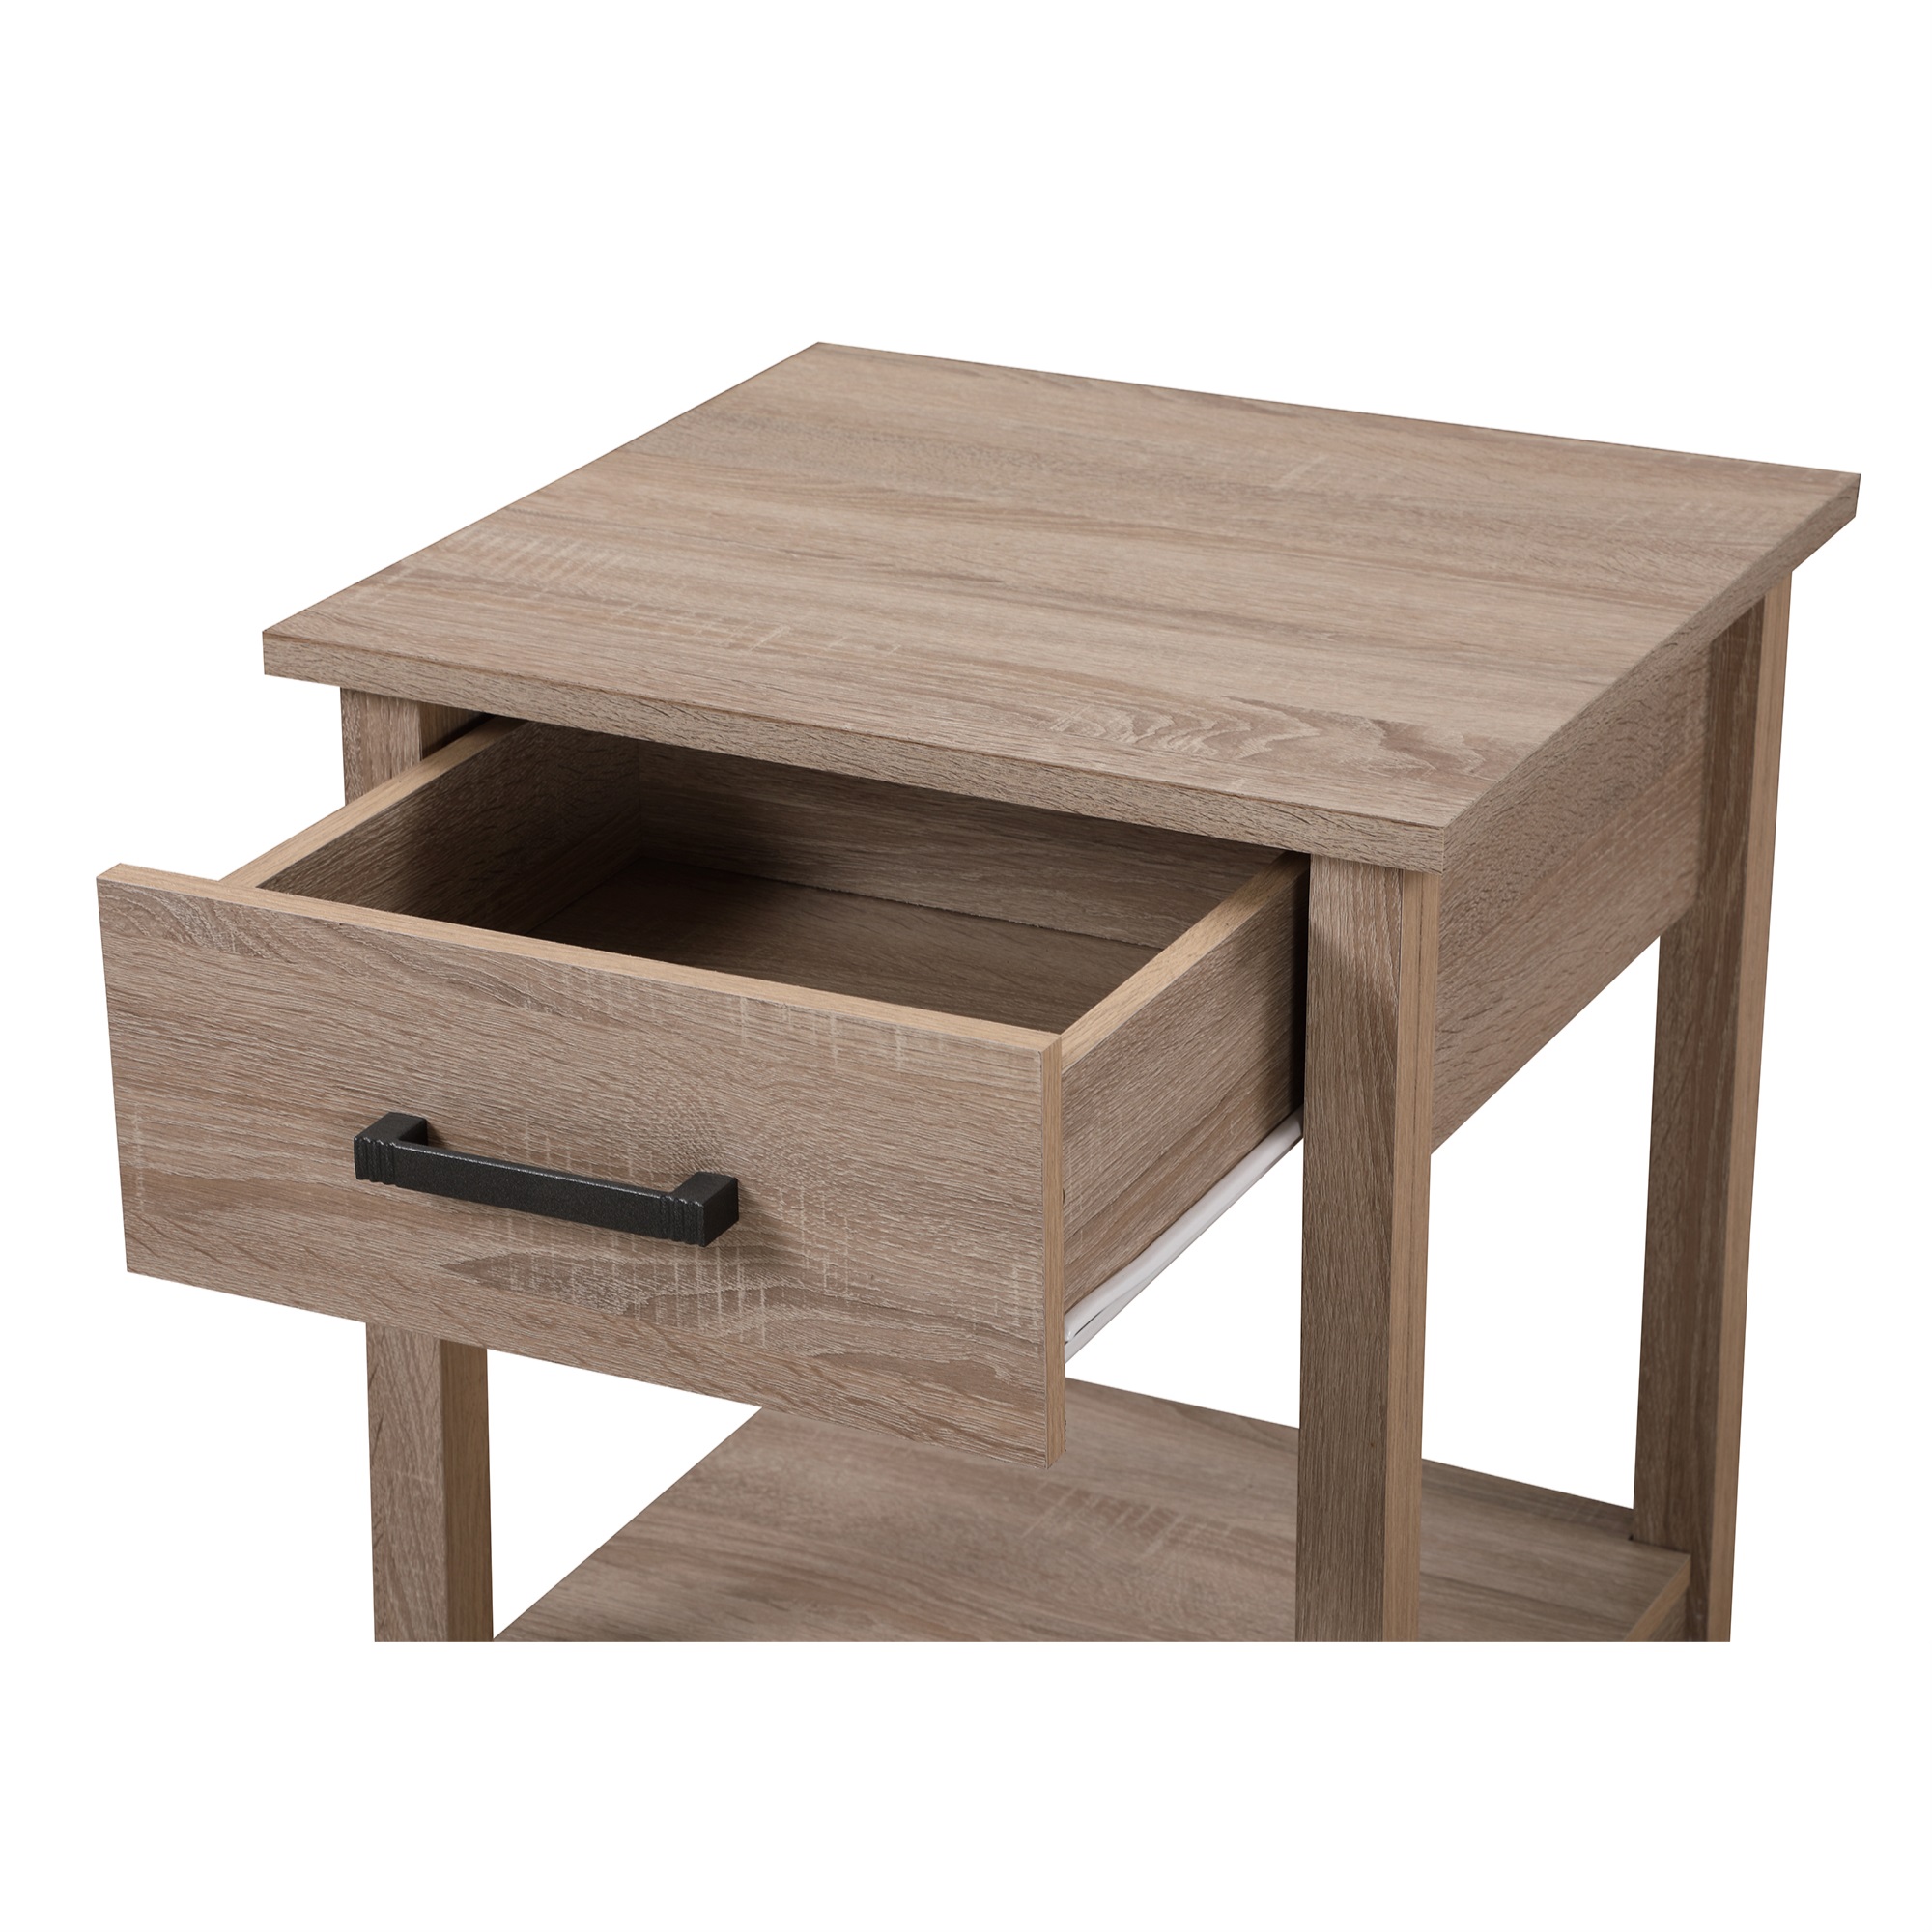 Passion Furniture Salem 1-Drawer Sandle Wood Nightstand (24 in. H x 19 in. W x 20 in. D)